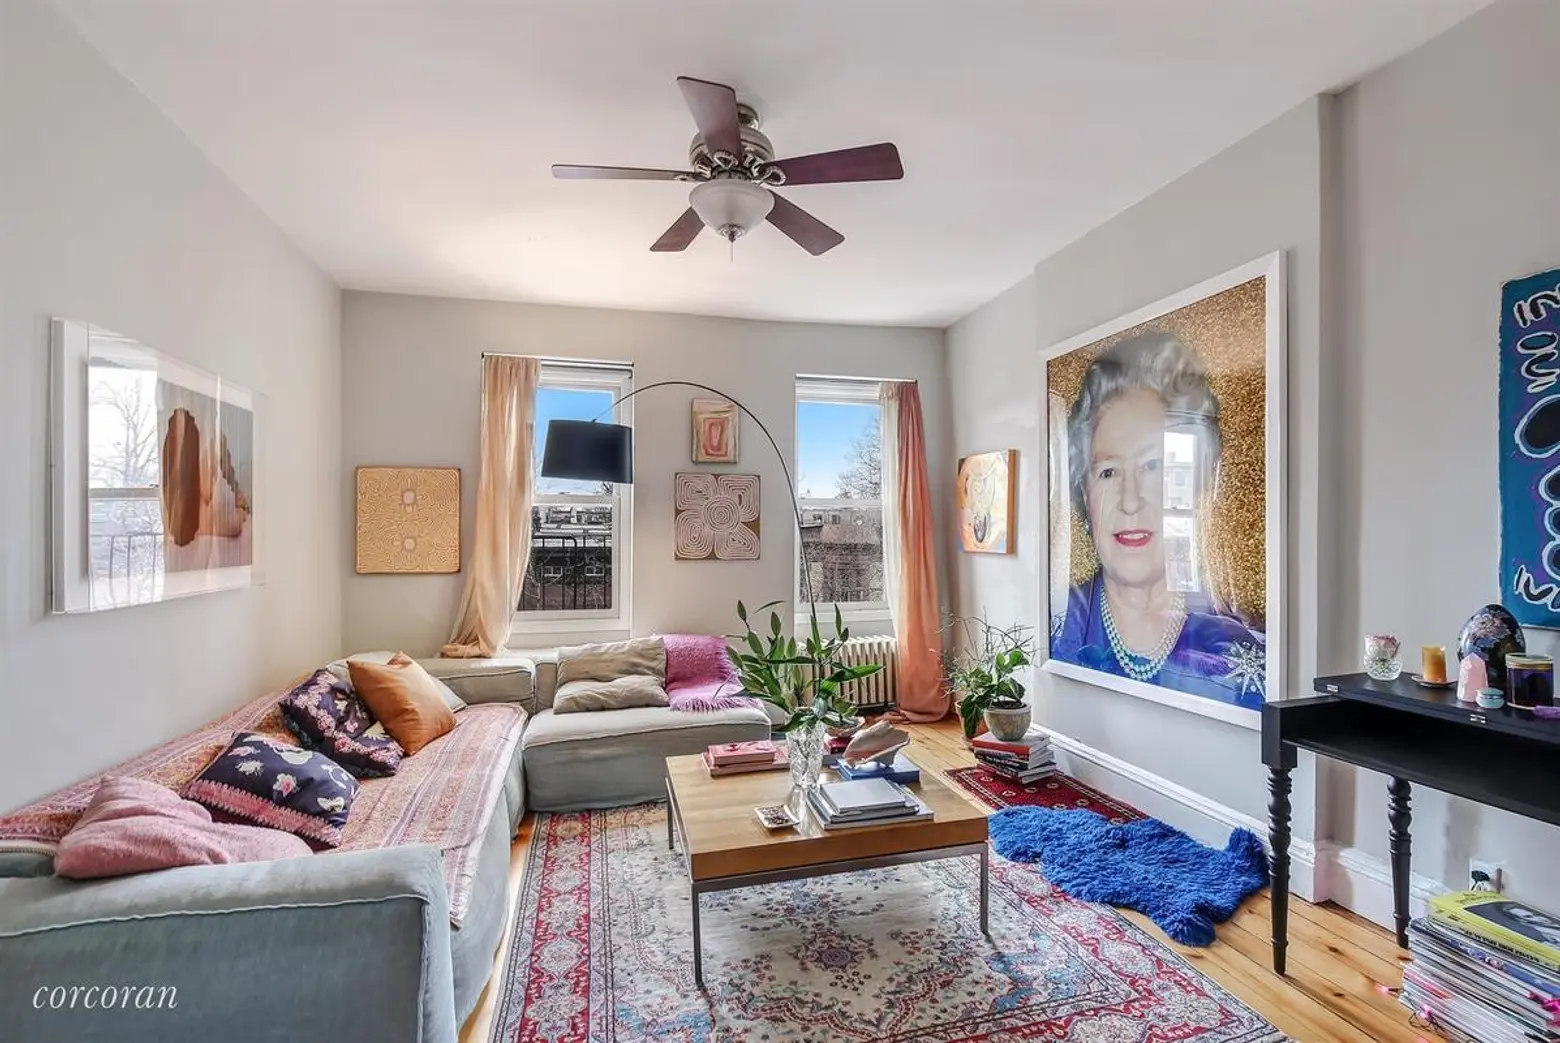 Cozy $625K Park Slope co-op has an air of royalty about it | 6sqft